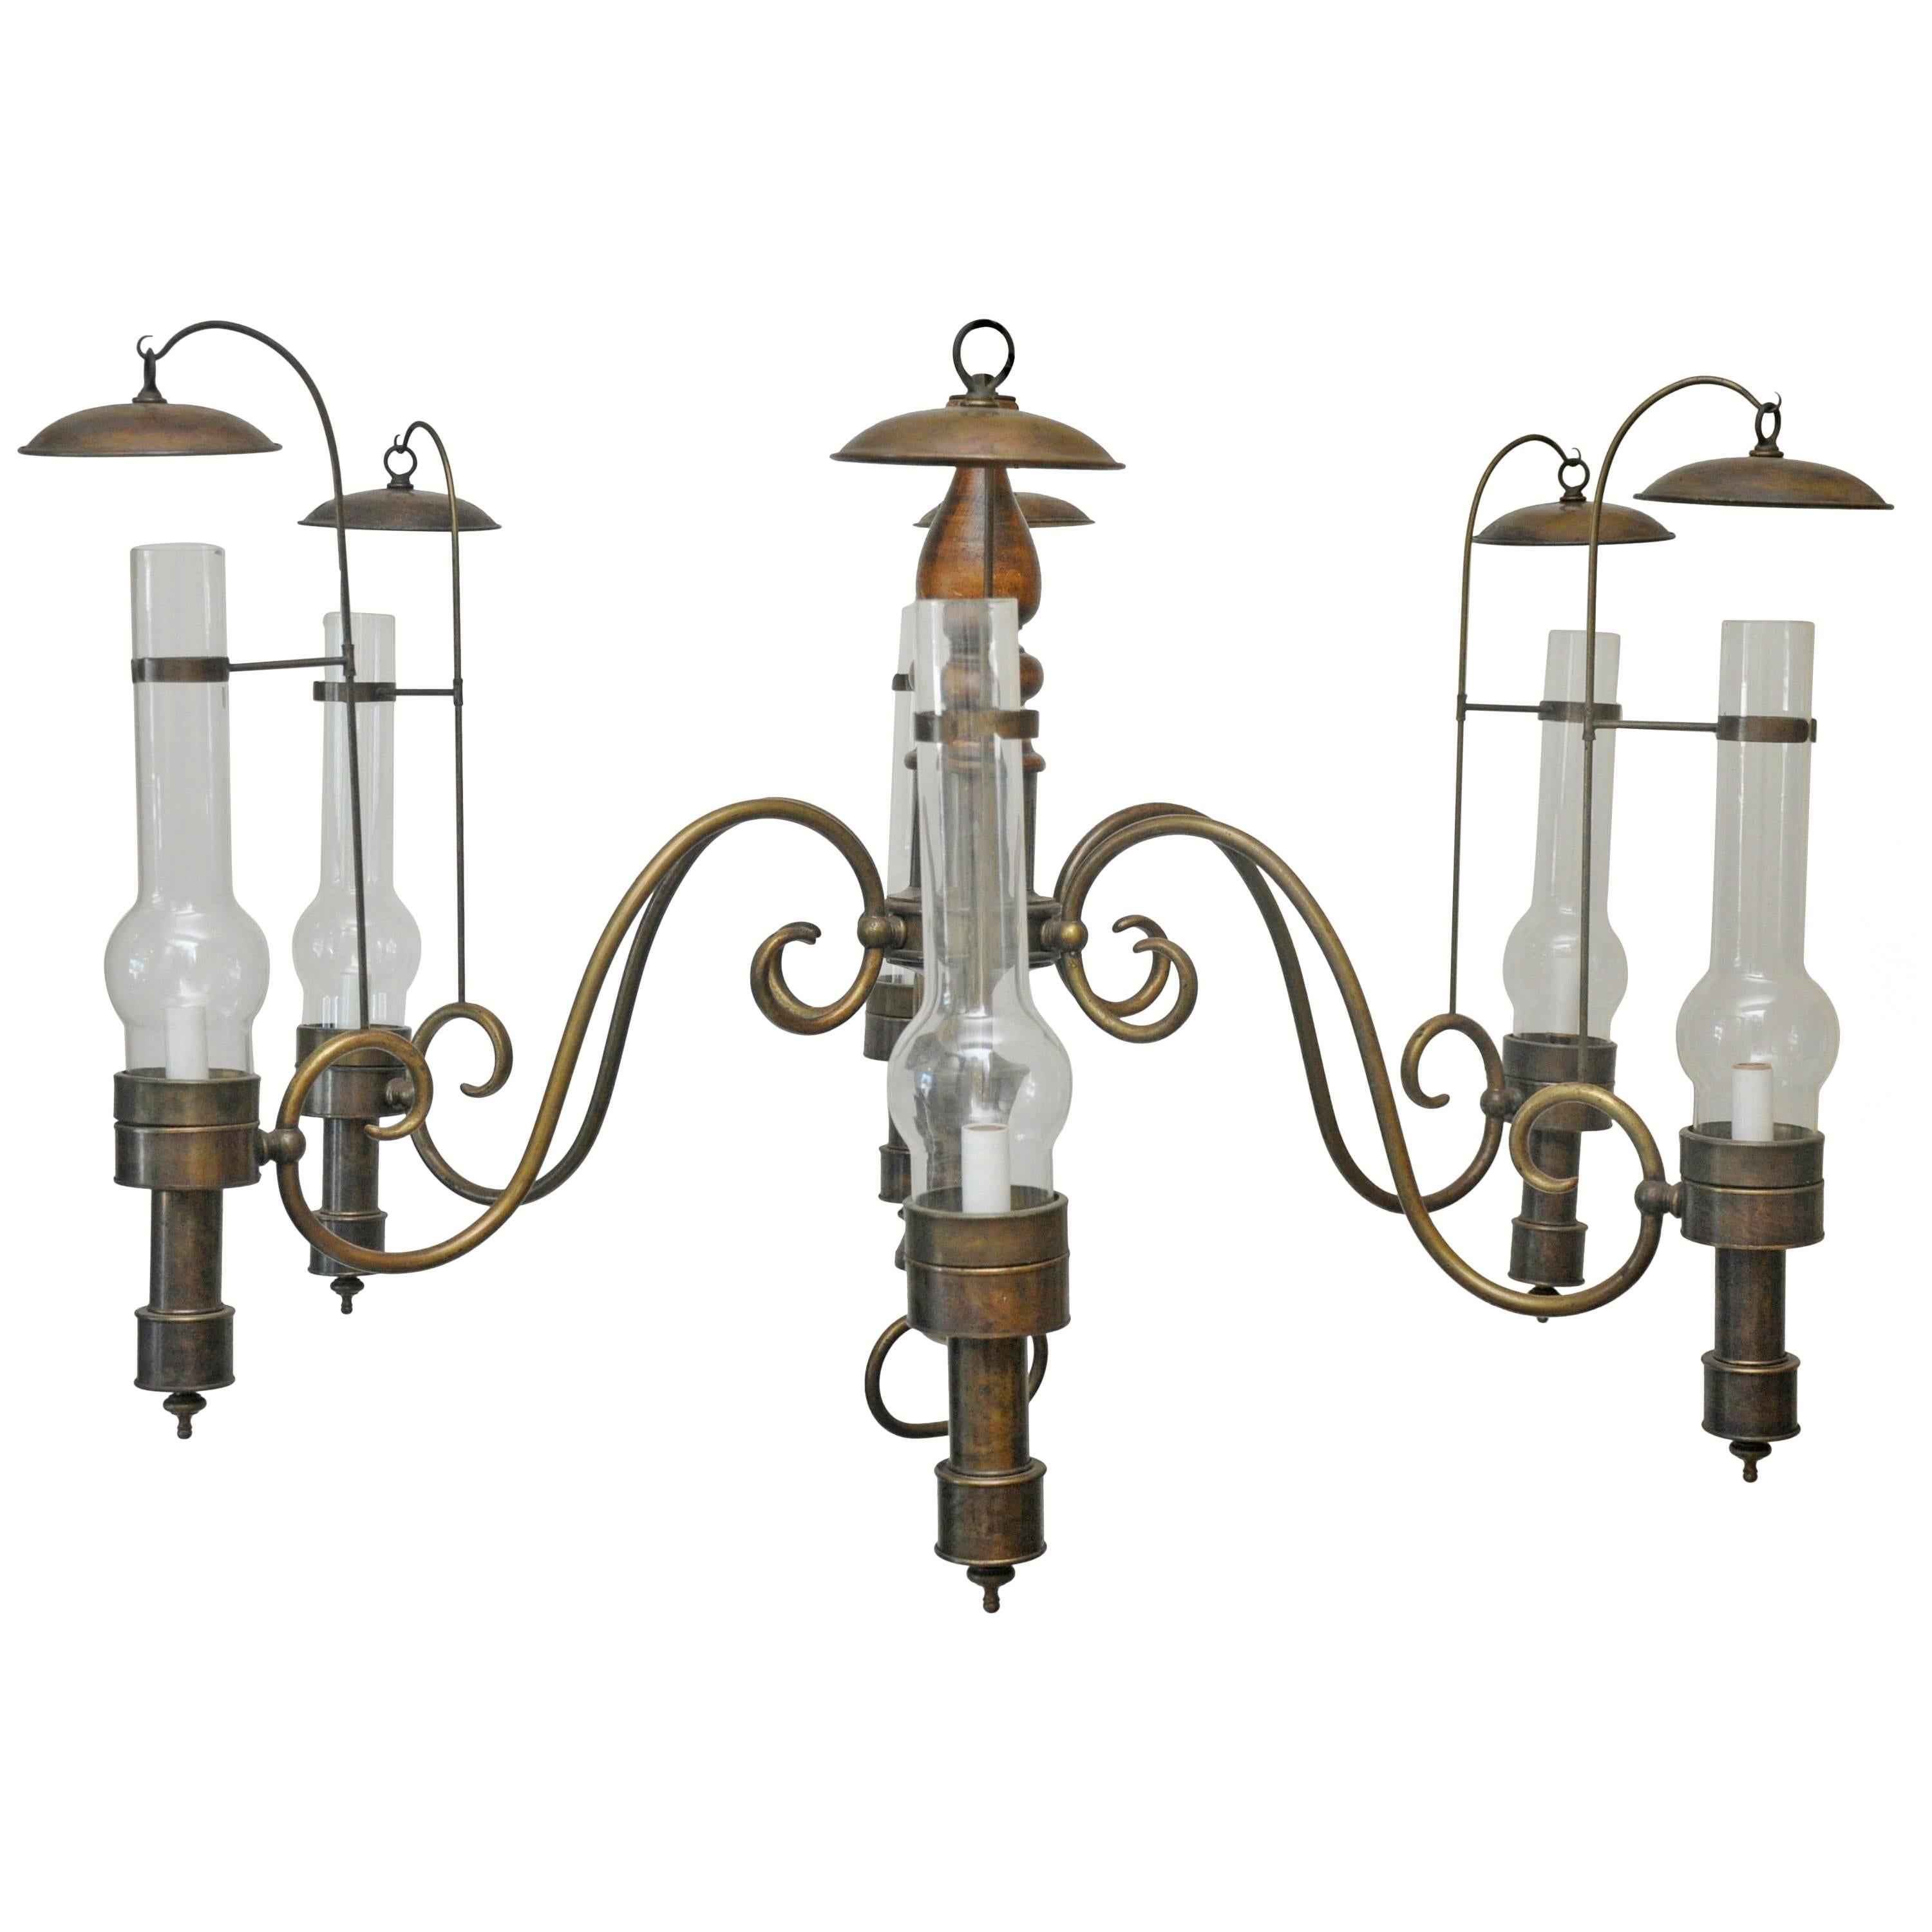 Large-Scale Vintage Commercial Campaign Style Chandelier For Sale